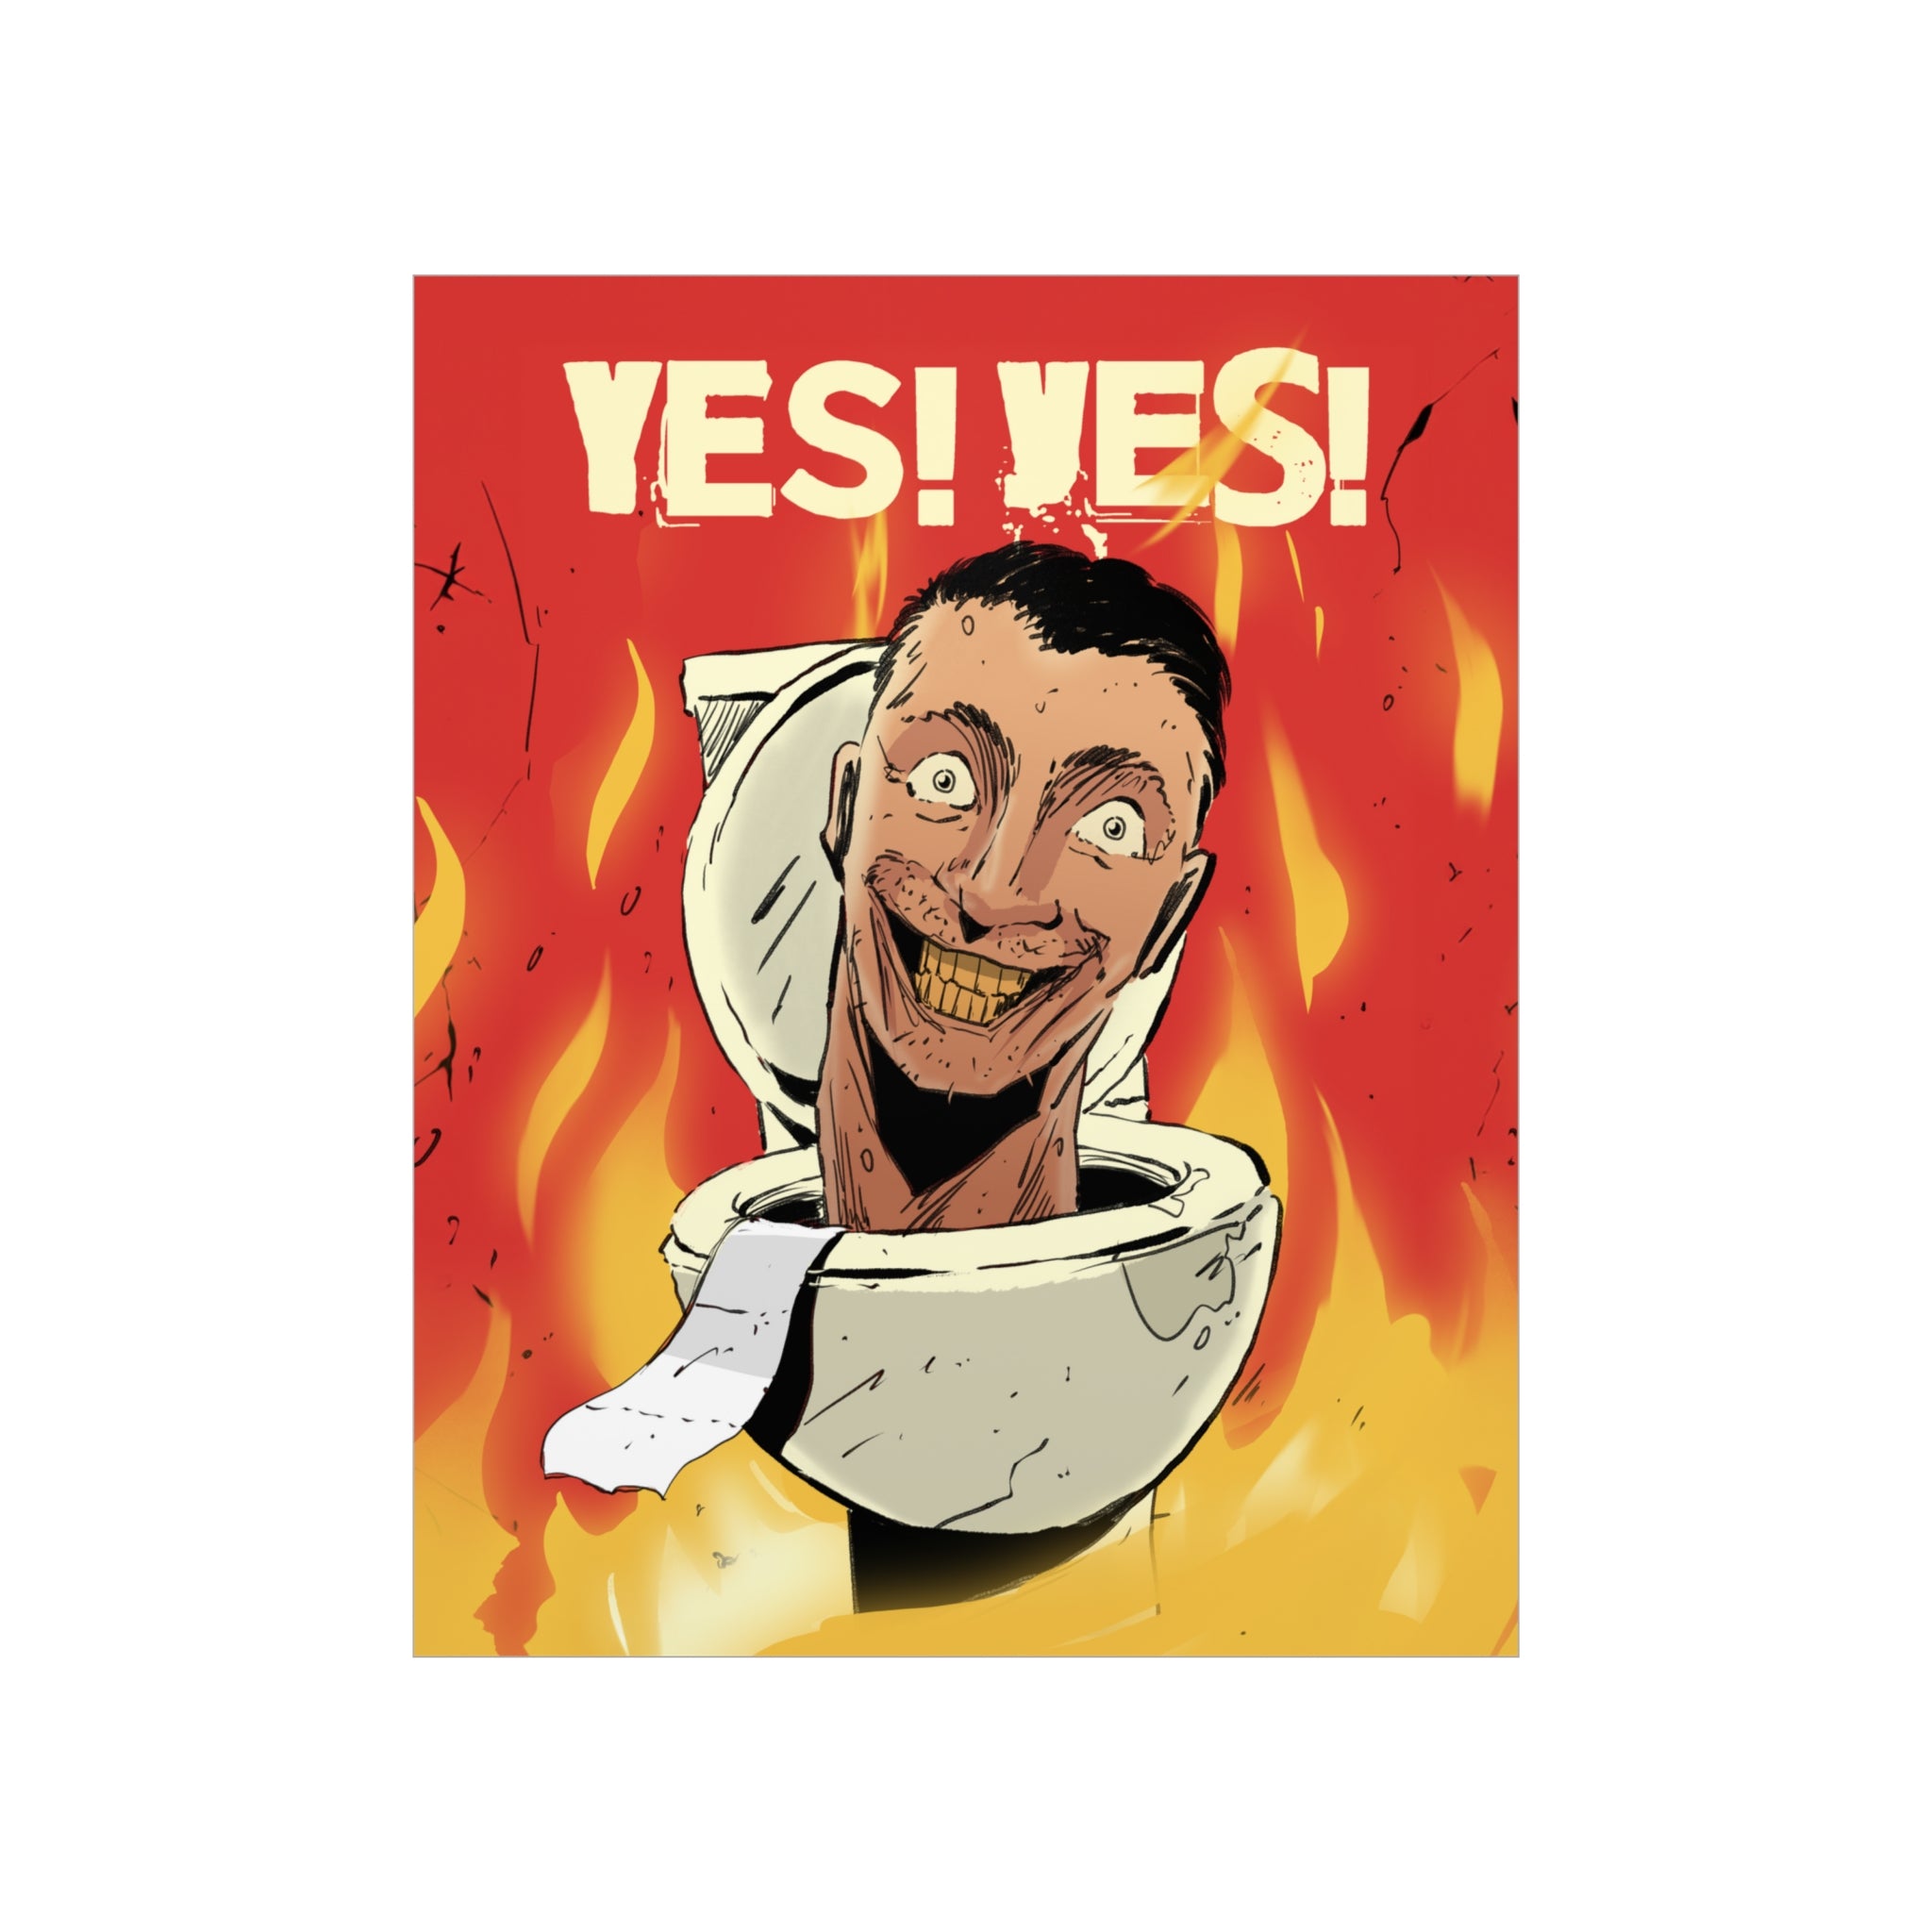 Yes! Yes! Poster Skibidi toilet with flames surrounding him on a poster on white background